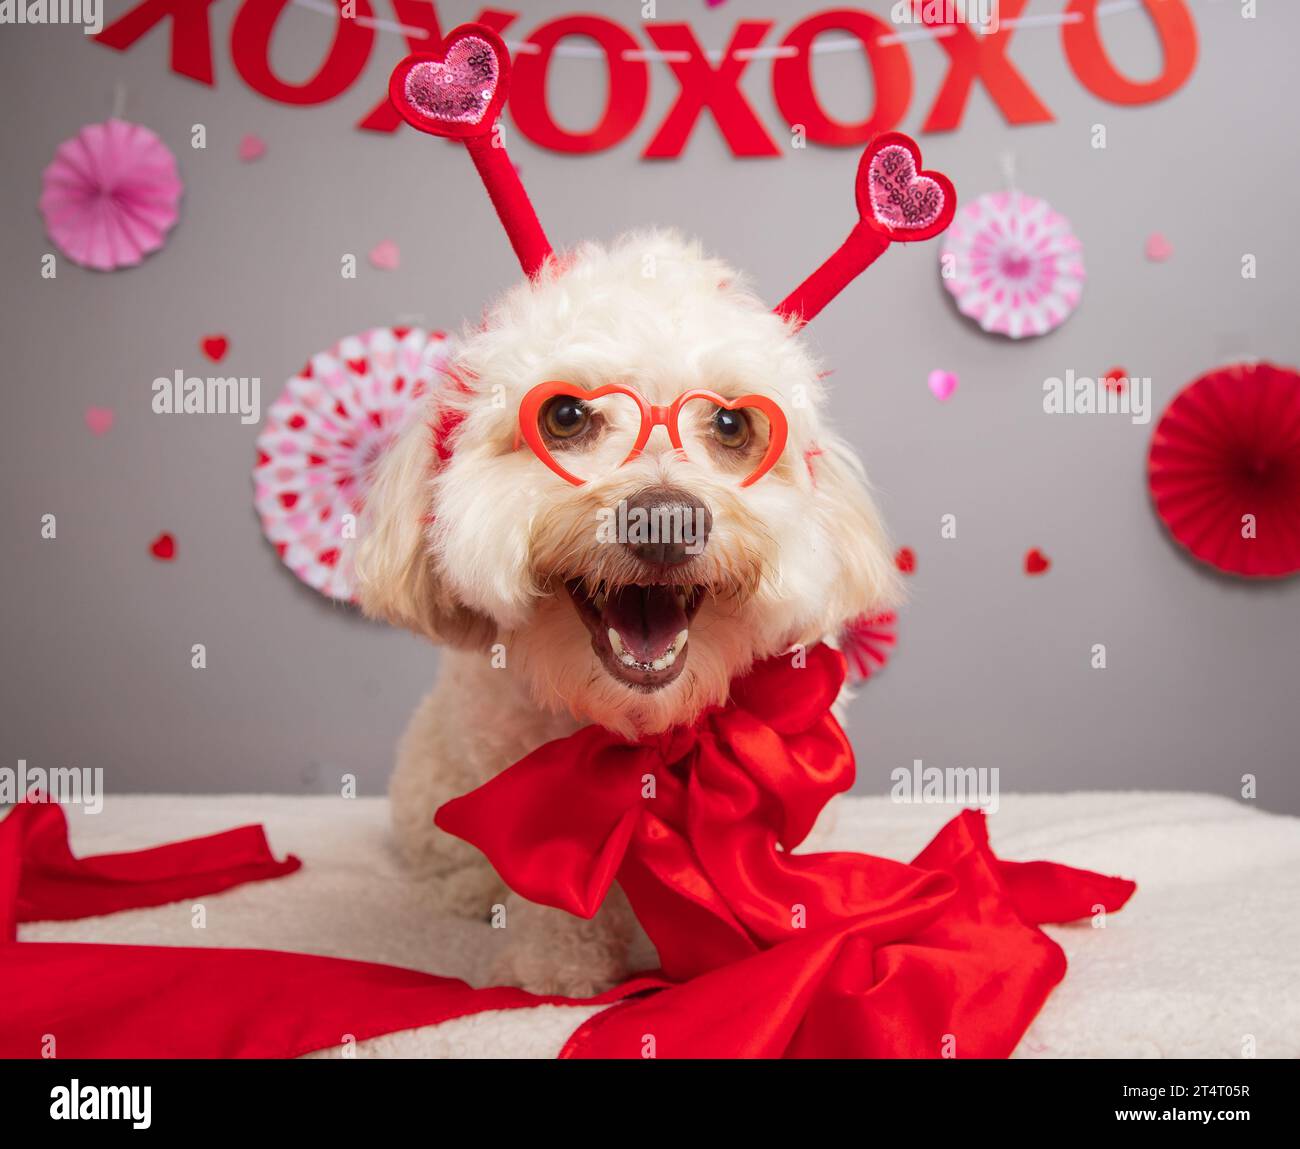 Portrait of a havanese wearing heart shaped novelty glasses, a bow and headband sitting in front of festive decorations Stock Photo